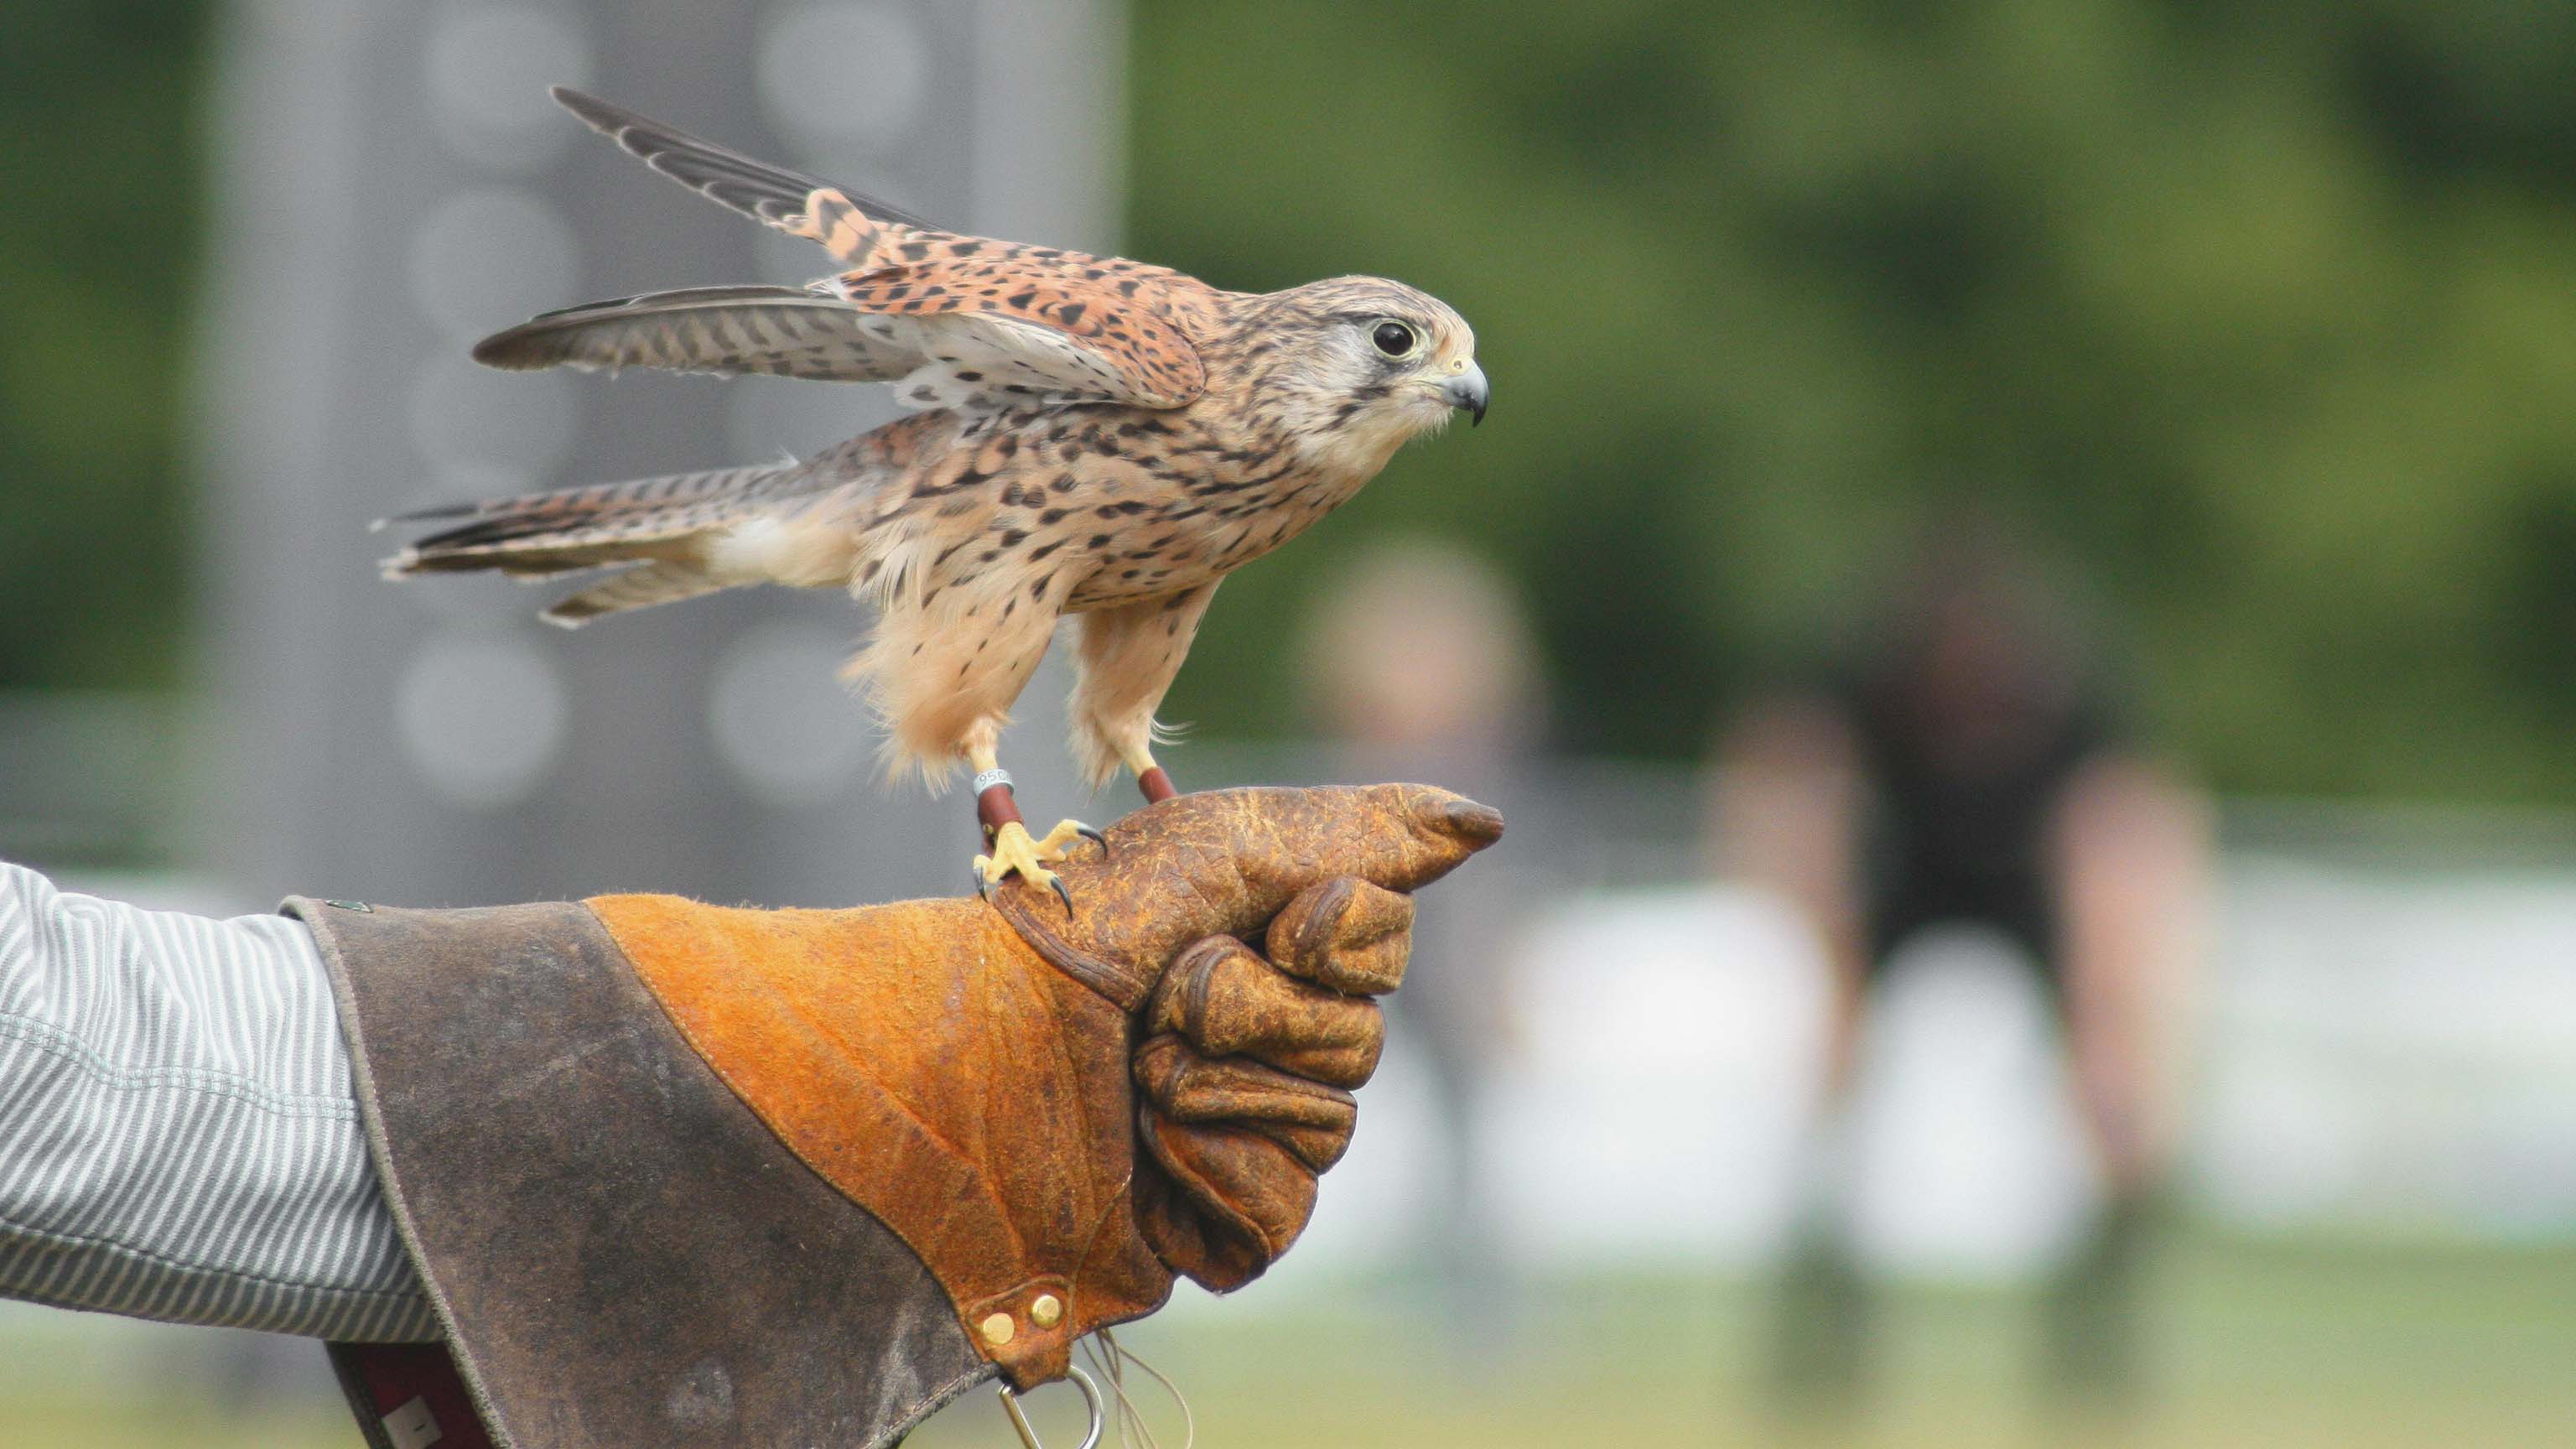 Cotswold Falconry Centre, near Moreton-in-Marsh